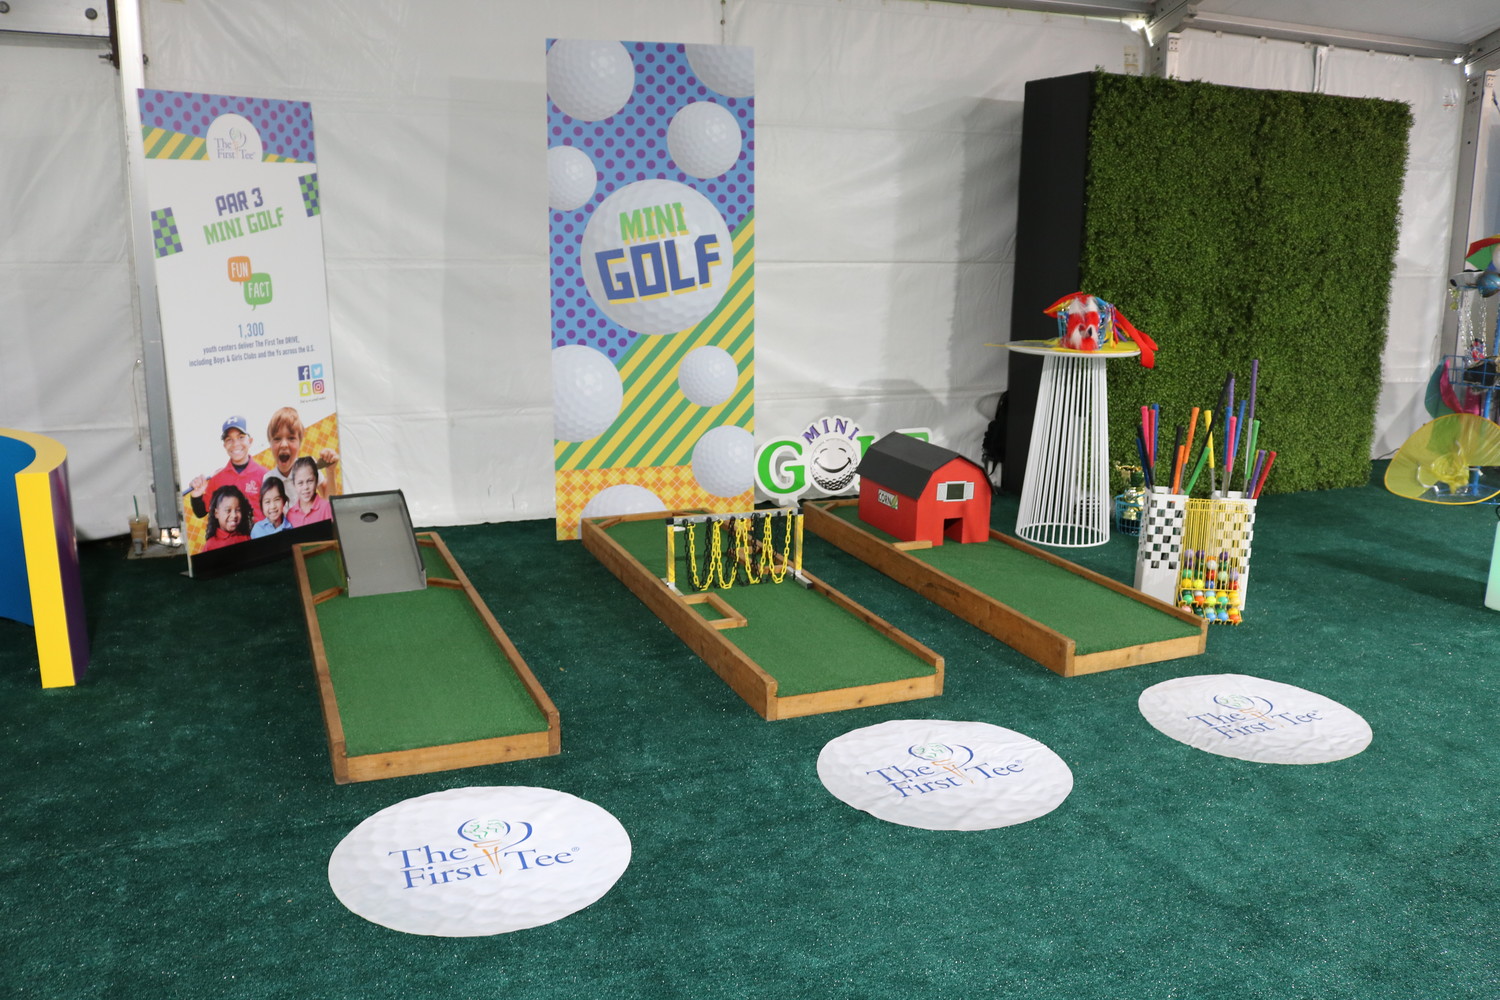 Located in The McKenzie Noelle Wilson Foundation Kid Zone, the First Tee Experience features several fun golf-related activities for kids.